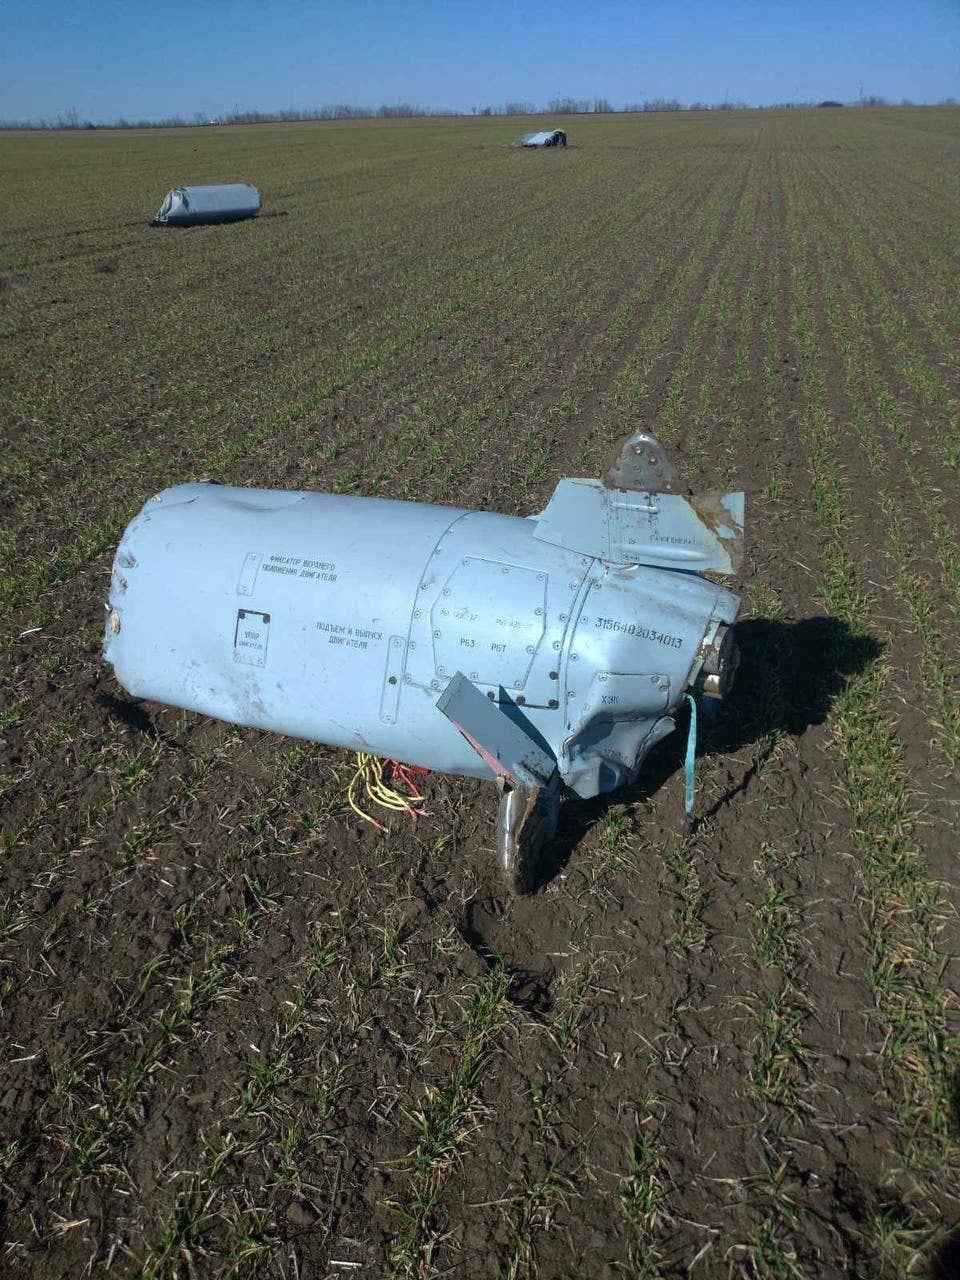 The remains of a Kh-101 cruise missile that came down in Ukraine in March 2022. <em>via author</em>